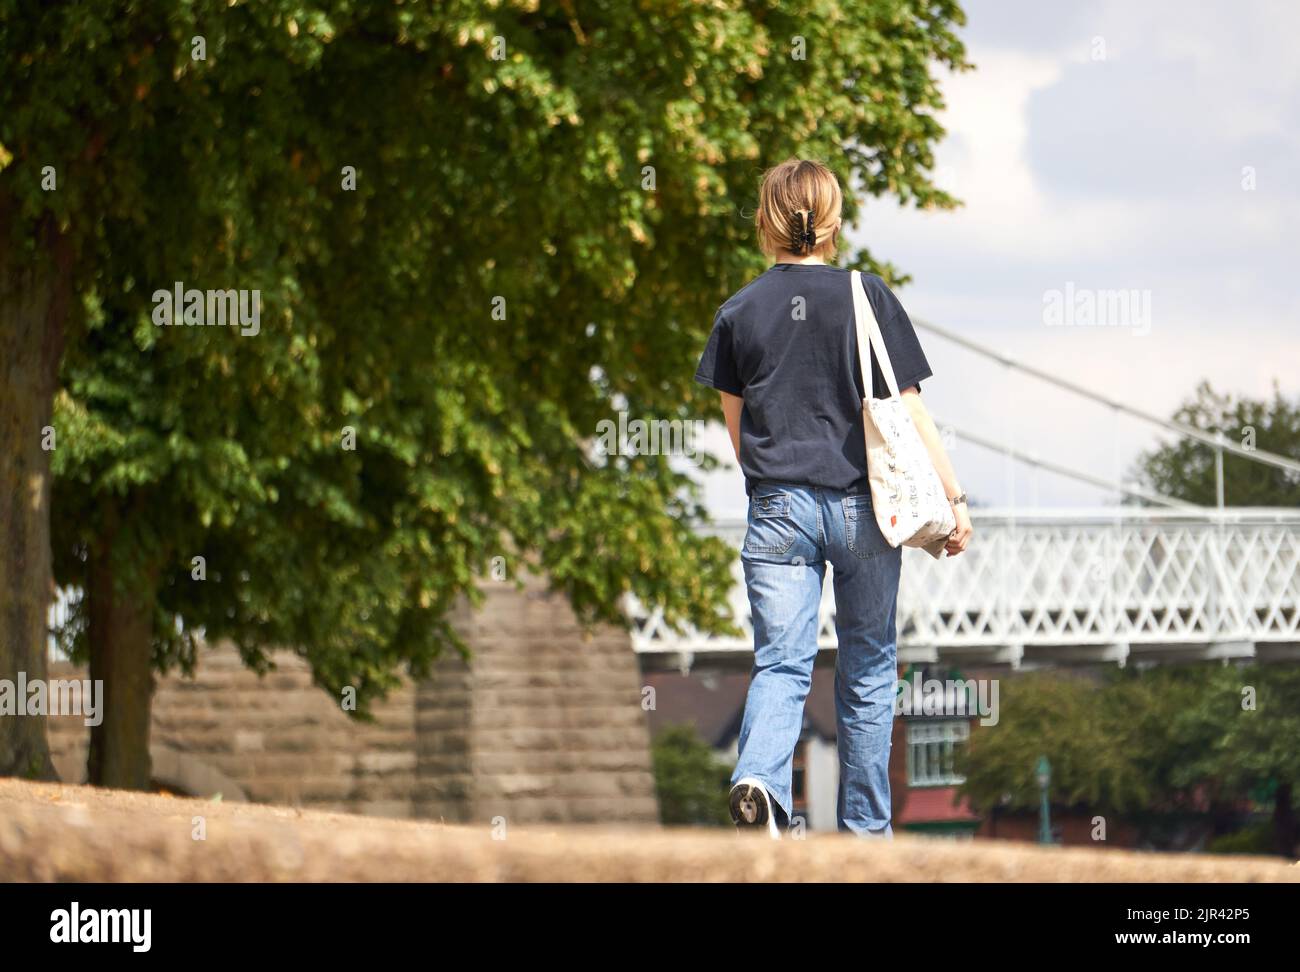 Girl walking outdoors in denim jeans and a t shirt Stock Photo